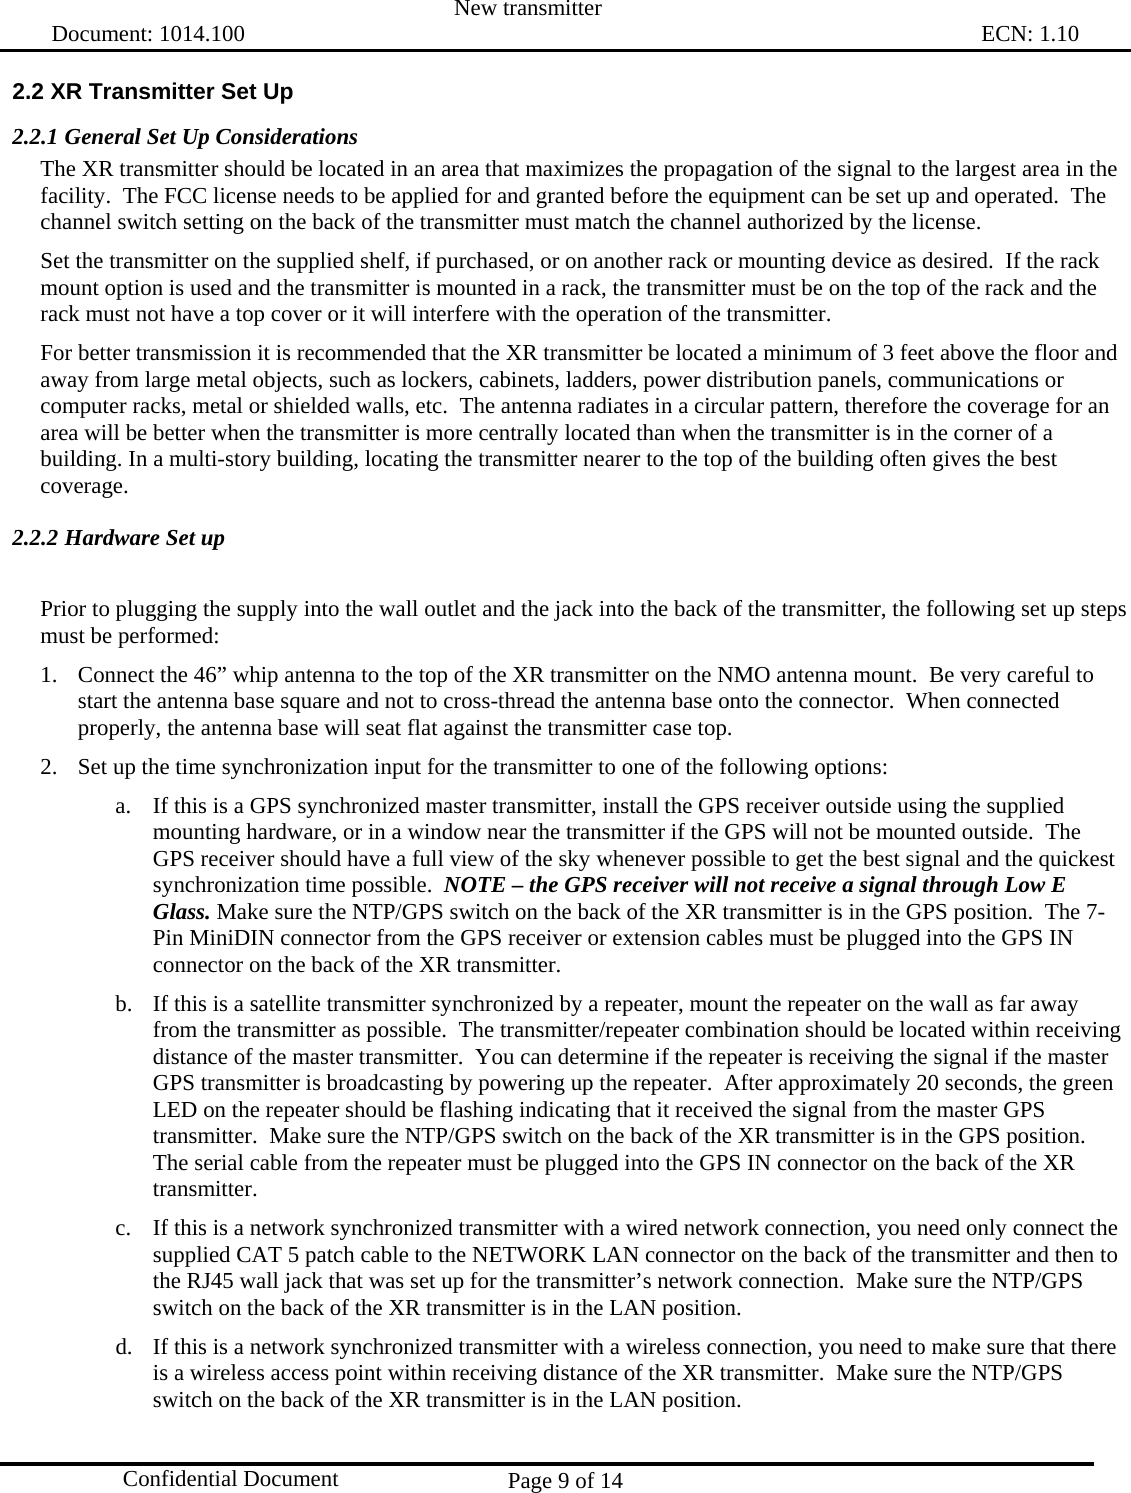  New transmitter   Document: 1014.100                                                                                                                                ECN: 1.10 Page 9 of 14  Confidential Document 2.2 XR Transmitter Set Up 2.2.1 General Set Up Considerations The XR transmitter should be located in an area that maximizes the propagation of the signal to the largest area in the facility.  The FCC license needs to be applied for and granted before the equipment can be set up and operated.  The channel switch setting on the back of the transmitter must match the channel authorized by the license. Set the transmitter on the supplied shelf, if purchased, or on another rack or mounting device as desired.  If the rack mount option is used and the transmitter is mounted in a rack, the transmitter must be on the top of the rack and the rack must not have a top cover or it will interfere with the operation of the transmitter. For better transmission it is recommended that the XR transmitter be located a minimum of 3 feet above the floor and away from large metal objects, such as lockers, cabinets, ladders, power distribution panels, communications or computer racks, metal or shielded walls, etc.  The antenna radiates in a circular pattern, therefore the coverage for an area will be better when the transmitter is more centrally located than when the transmitter is in the corner of a building. In a multi-story building, locating the transmitter nearer to the top of the building often gives the best coverage. 2.2.2 Hardware Set up  Prior to plugging the supply into the wall outlet and the jack into the back of the transmitter, the following set up steps must be performed: 1. Connect the 46” whip antenna to the top of the XR transmitter on the NMO antenna mount.  Be very careful to start the antenna base square and not to cross-thread the antenna base onto the connector.  When connected properly, the antenna base will seat flat against the transmitter case top. 2. Set up the time synchronization input for the transmitter to one of the following options: a. If this is a GPS synchronized master transmitter, install the GPS receiver outside using the supplied mounting hardware, or in a window near the transmitter if the GPS will not be mounted outside.  The GPS receiver should have a full view of the sky whenever possible to get the best signal and the quickest synchronization time possible.  NOTE – the GPS receiver will not receive a signal through Low E Glass. Make sure the NTP/GPS switch on the back of the XR transmitter is in the GPS position.  The 7-Pin MiniDIN connector from the GPS receiver or extension cables must be plugged into the GPS IN connector on the back of the XR transmitter. b. If this is a satellite transmitter synchronized by a repeater, mount the repeater on the wall as far away from the transmitter as possible.  The transmitter/repeater combination should be located within receiving distance of the master transmitter.  You can determine if the repeater is receiving the signal if the master GPS transmitter is broadcasting by powering up the repeater.  After approximately 20 seconds, the green LED on the repeater should be flashing indicating that it received the signal from the master GPS transmitter.  Make sure the NTP/GPS switch on the back of the XR transmitter is in the GPS position.  The serial cable from the repeater must be plugged into the GPS IN connector on the back of the XR transmitter. c. If this is a network synchronized transmitter with a wired network connection, you need only connect the supplied CAT 5 patch cable to the NETWORK LAN connector on the back of the transmitter and then to the RJ45 wall jack that was set up for the transmitter’s network connection.  Make sure the NTP/GPS switch on the back of the XR transmitter is in the LAN position.   d. If this is a network synchronized transmitter with a wireless connection, you need to make sure that there is a wireless access point within receiving distance of the XR transmitter.  Make sure the NTP/GPS switch on the back of the XR transmitter is in the LAN position.   